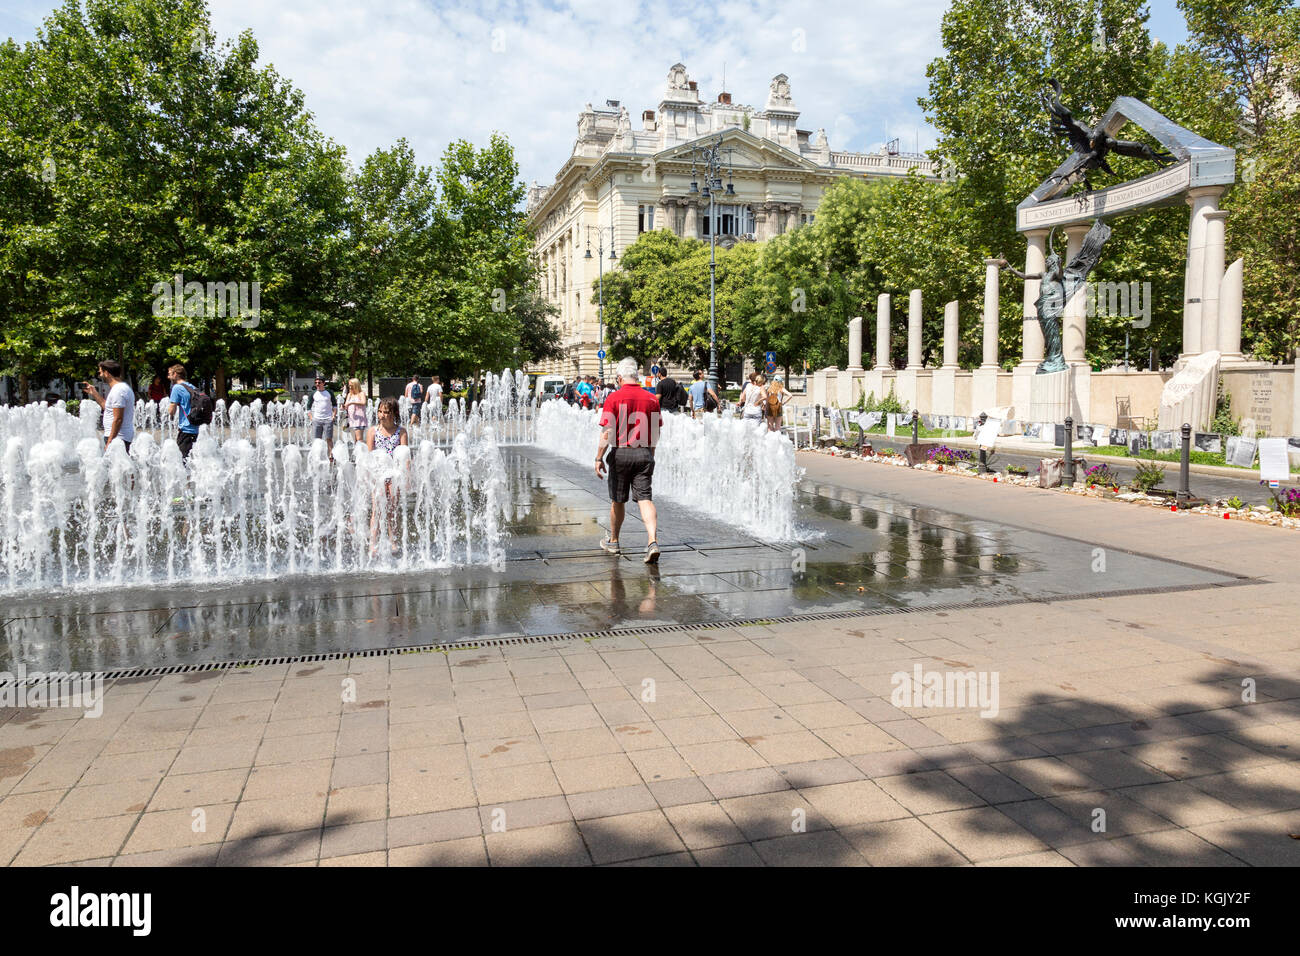 Square in Budapest with man walking through fountain. Monument to the Hungarian victims of the Nazis. Stock Photo